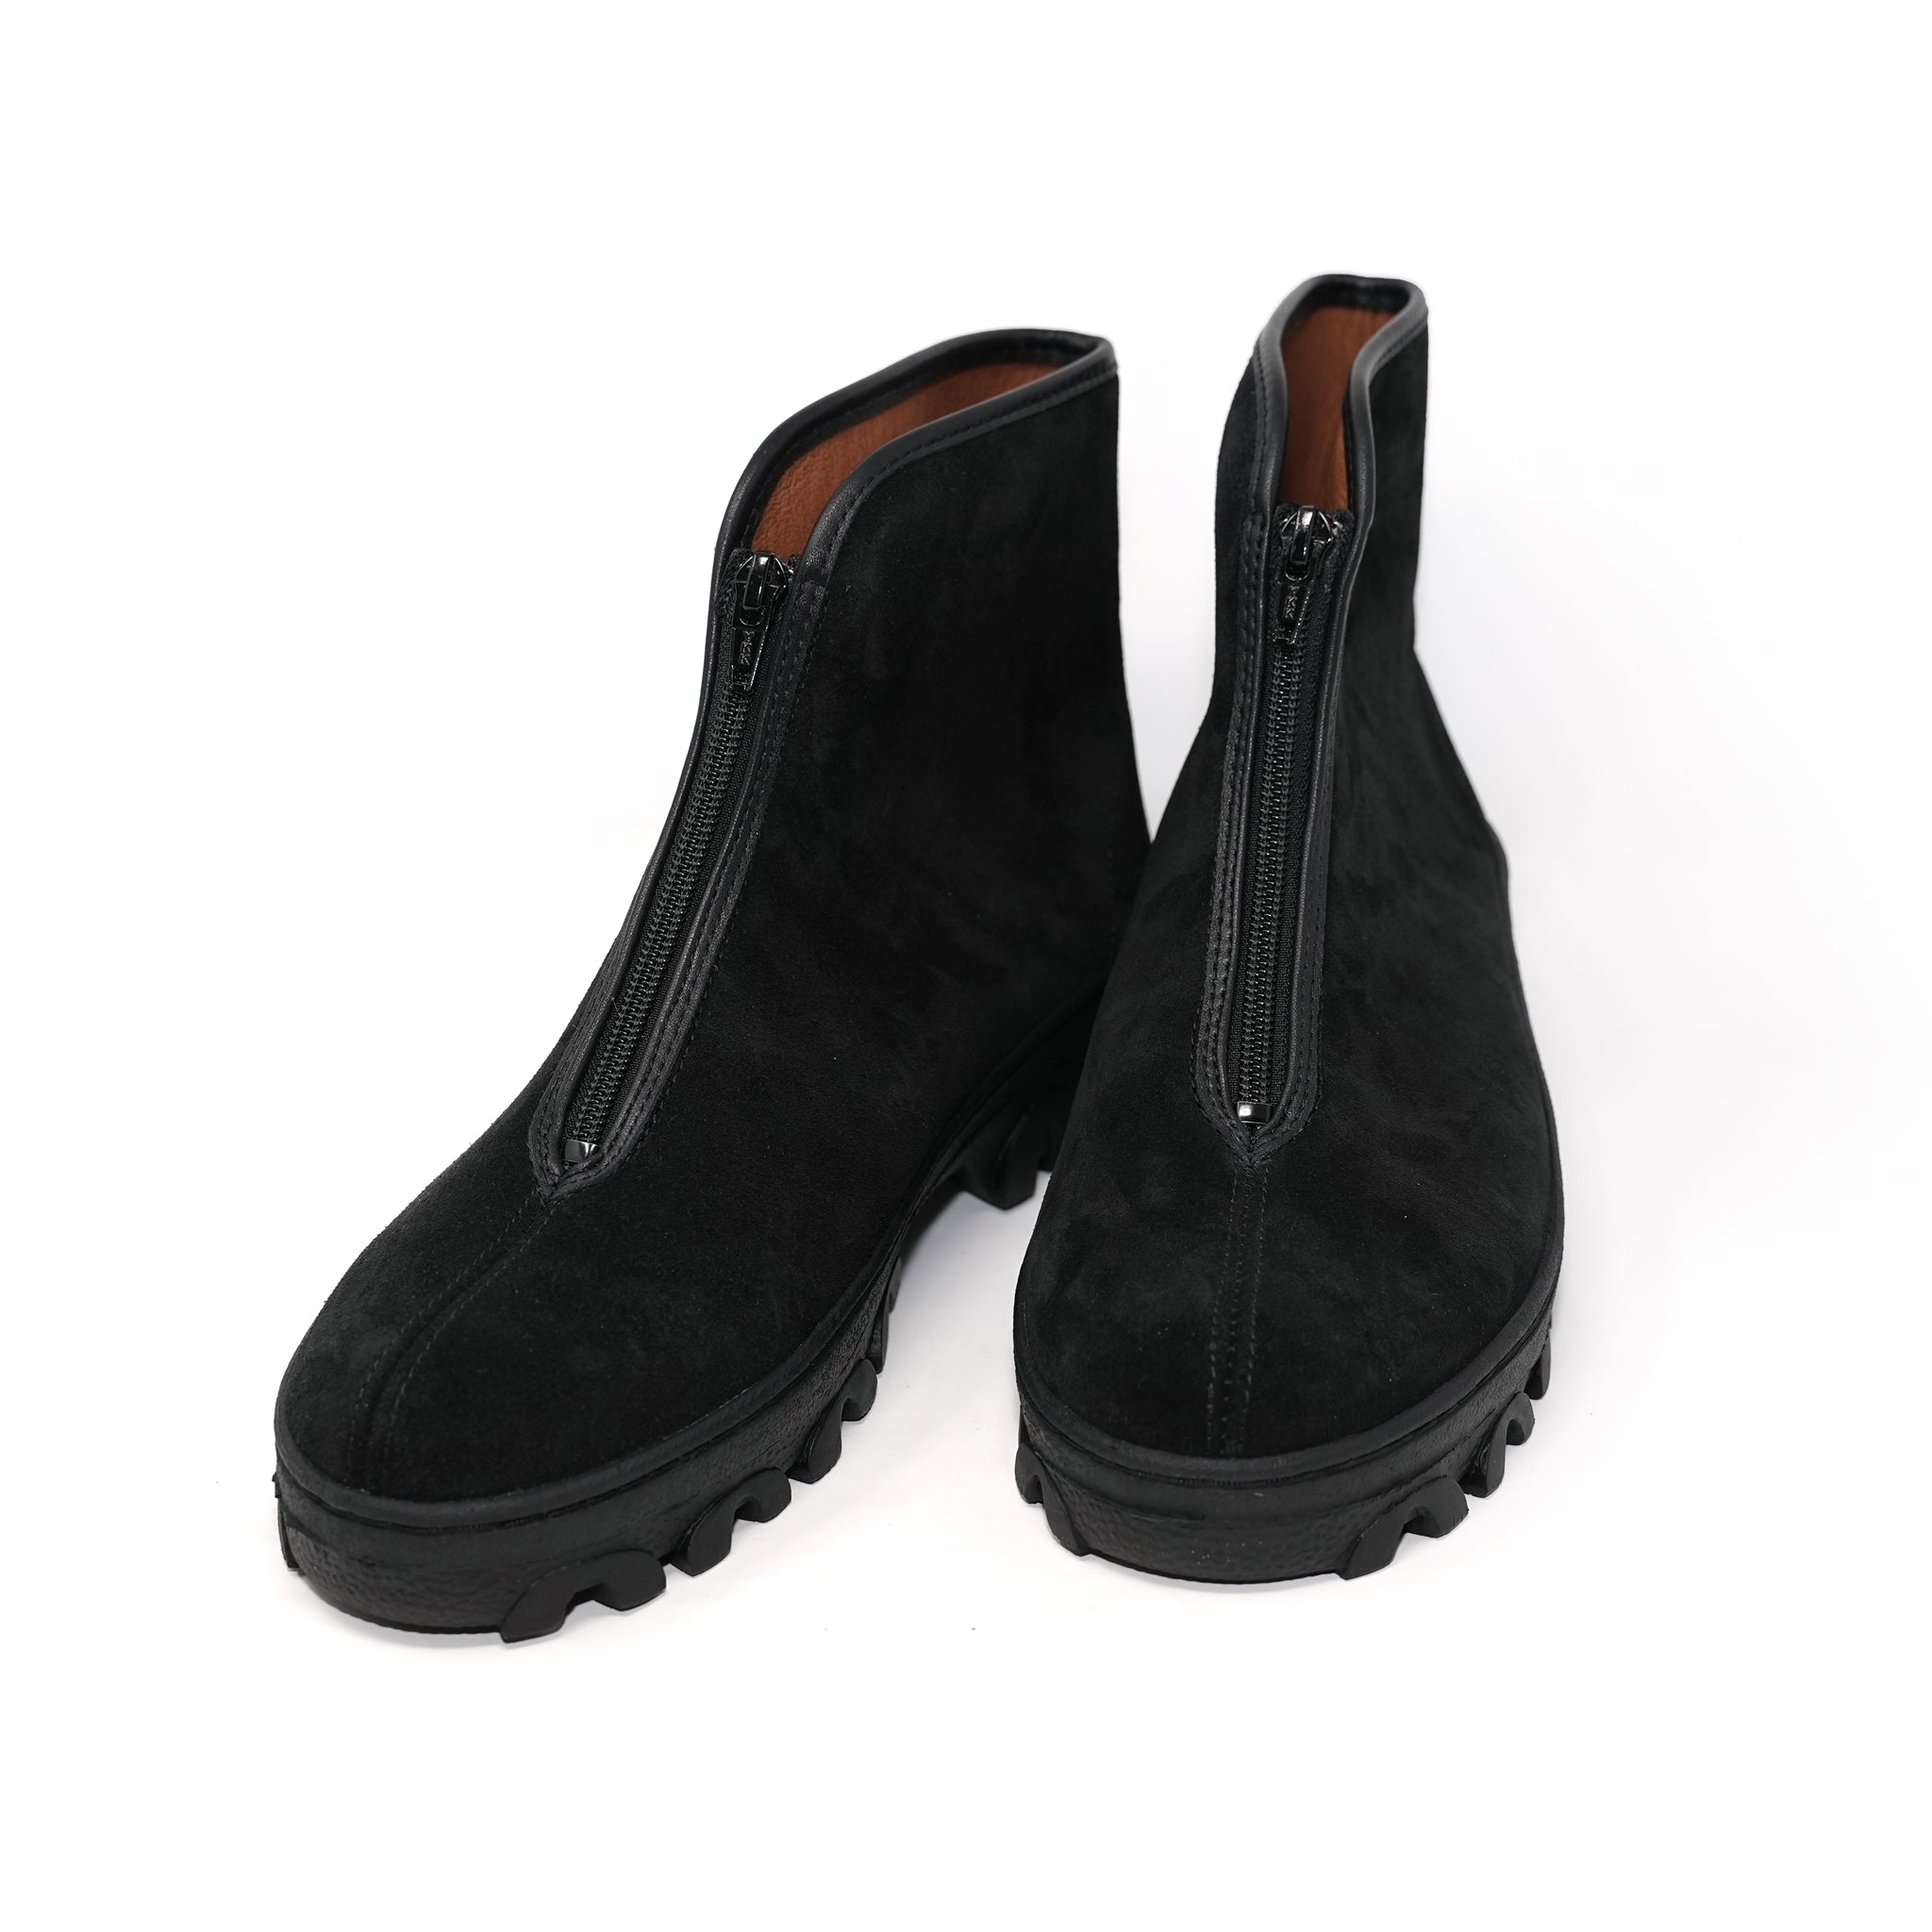 No:540SSB | Name:RUSSIAN MILITARY BOOTS | Color:Black Suede【REPRODUCTION OF FOUND_リプロダクションオブファウンド】